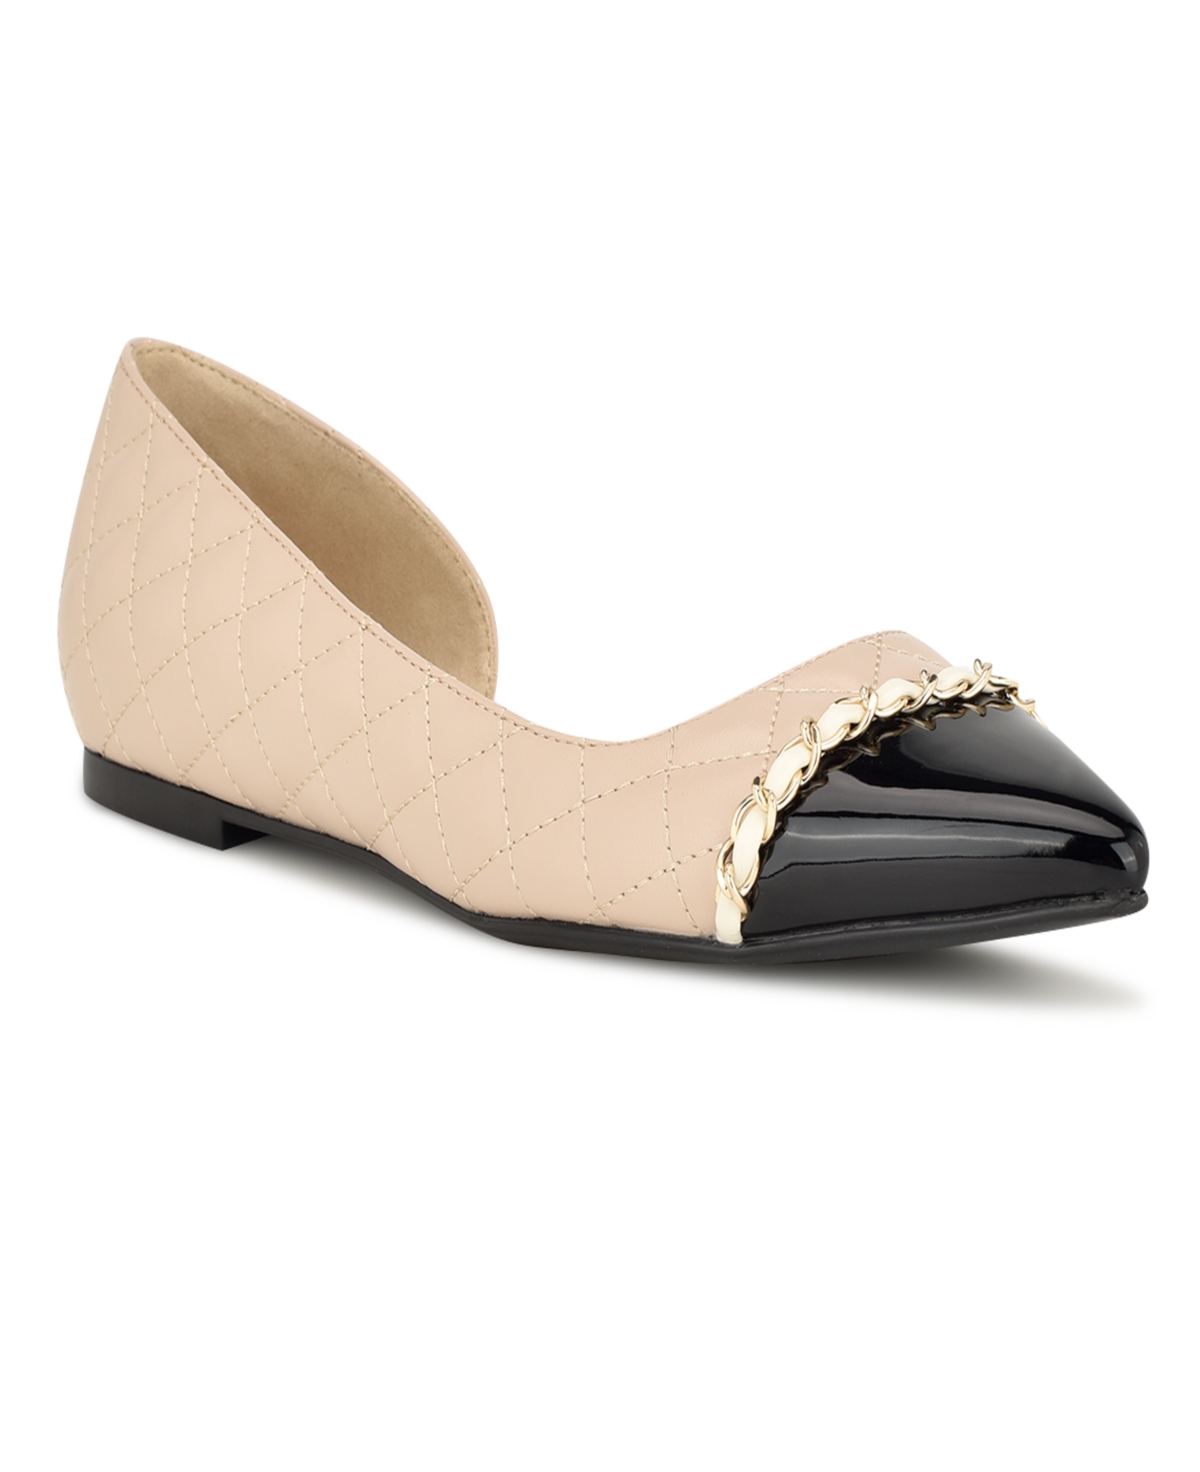 Nine West Women's Breza Slip-on Pointy Toe Dress Flats In Light Natural Multi - Faux Leather And F